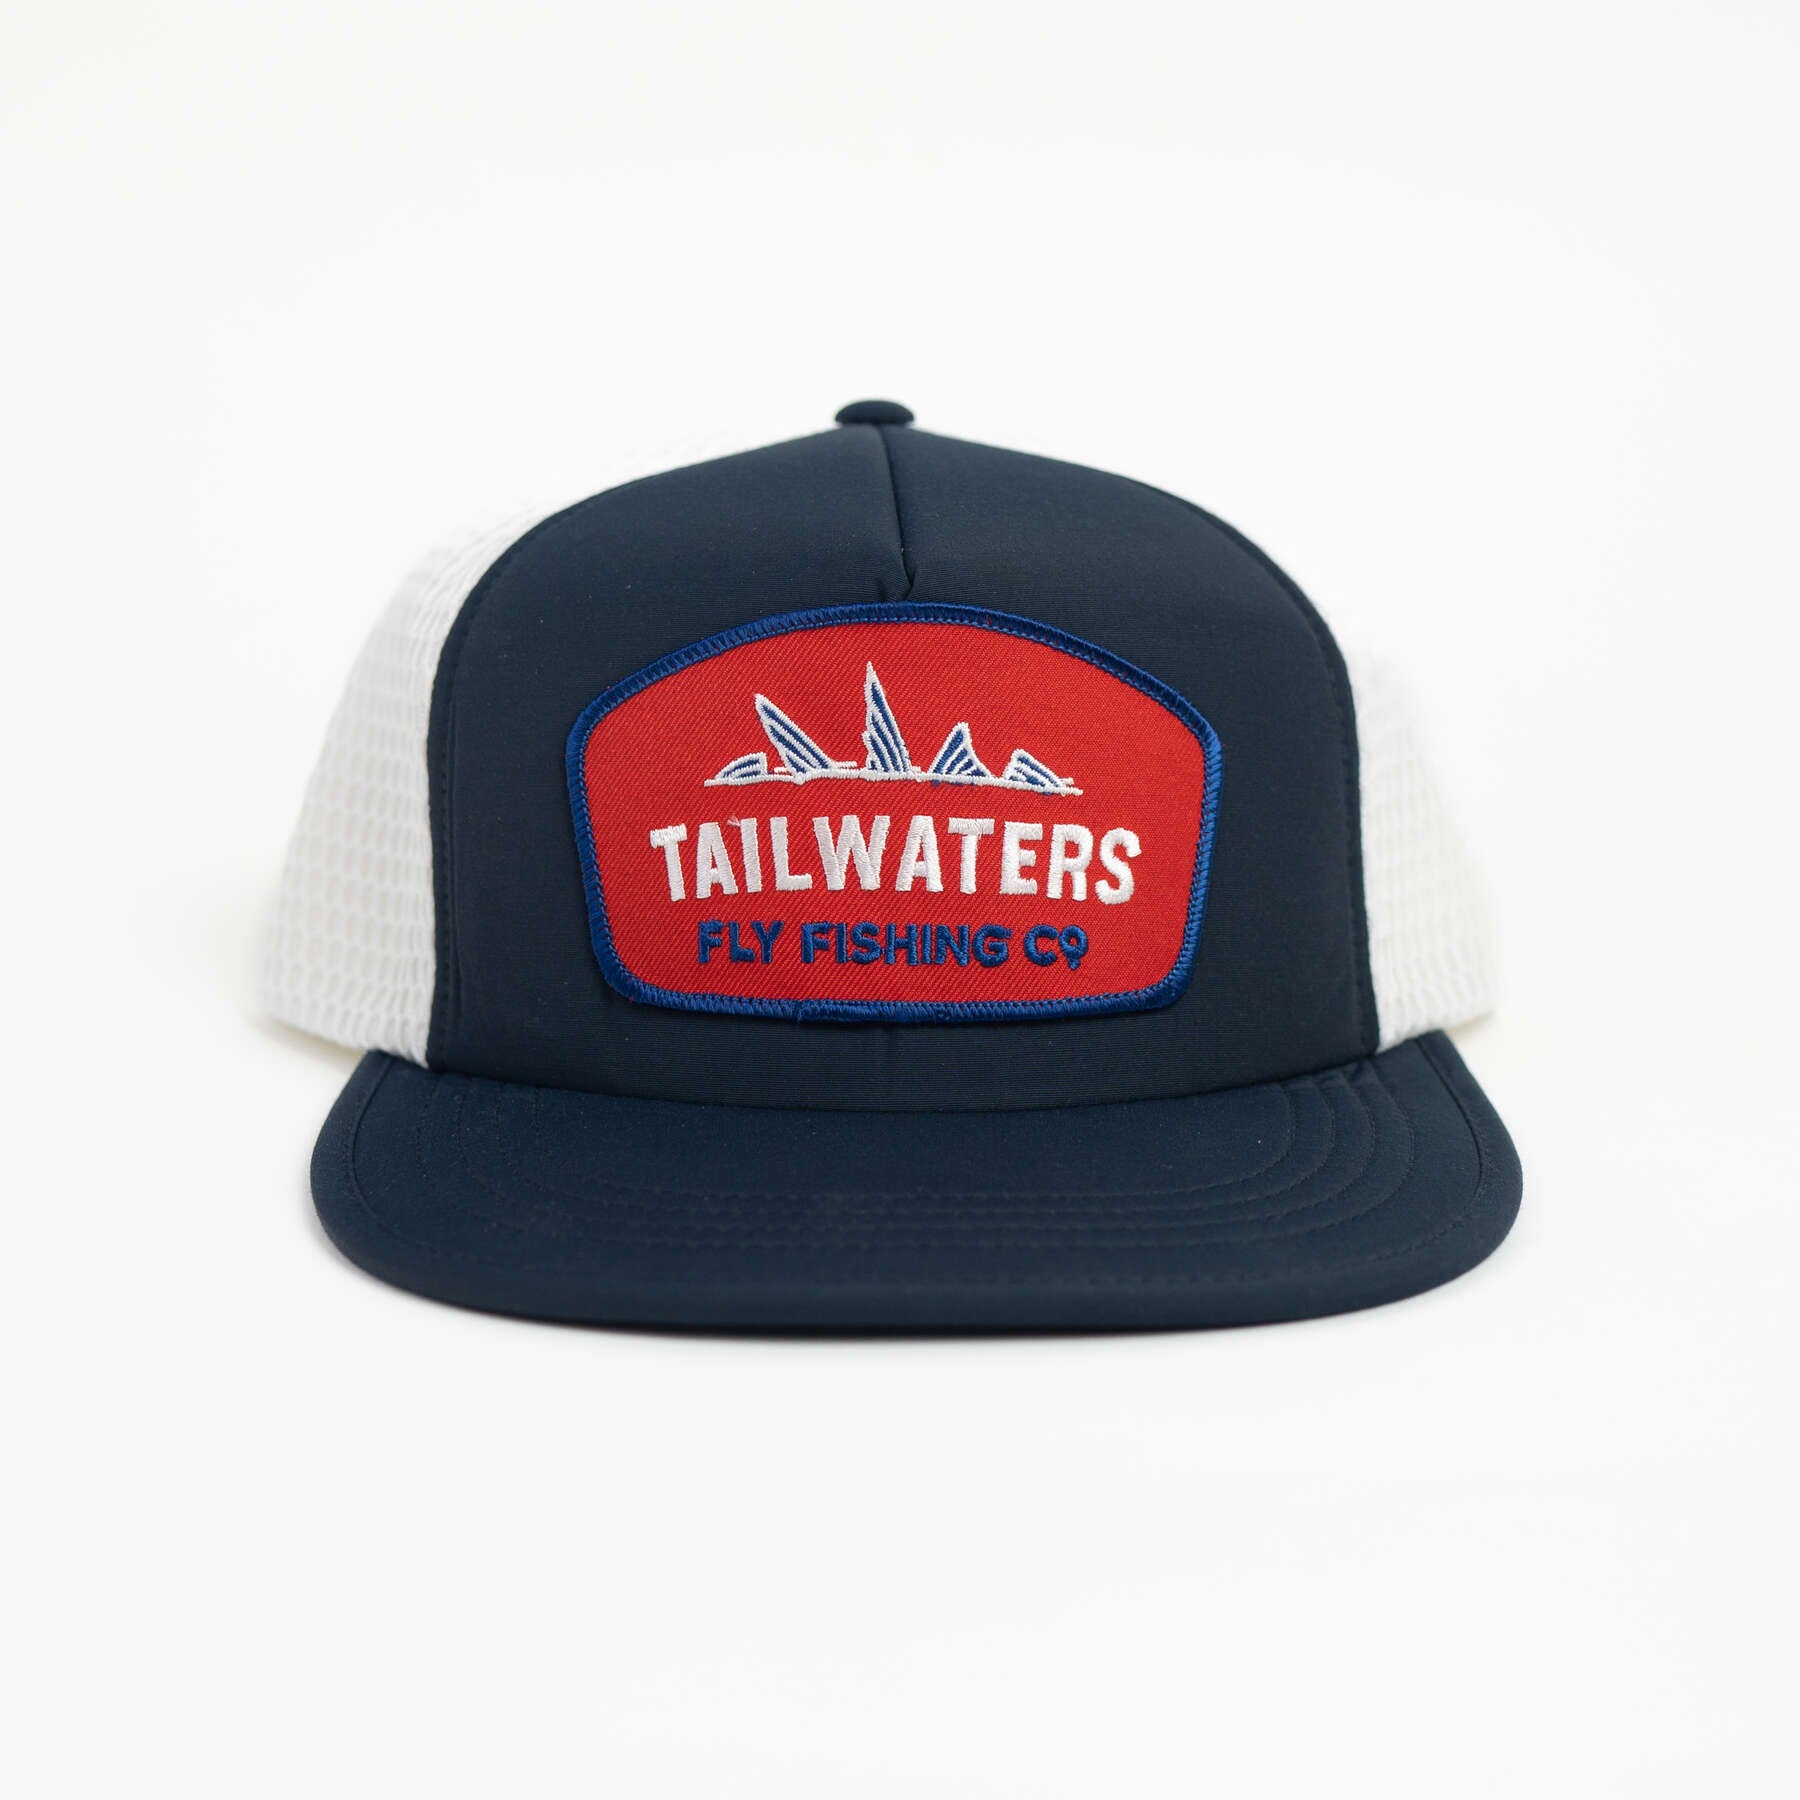 Tailwaters Fly Fishing Tails Logo Trucker Hat